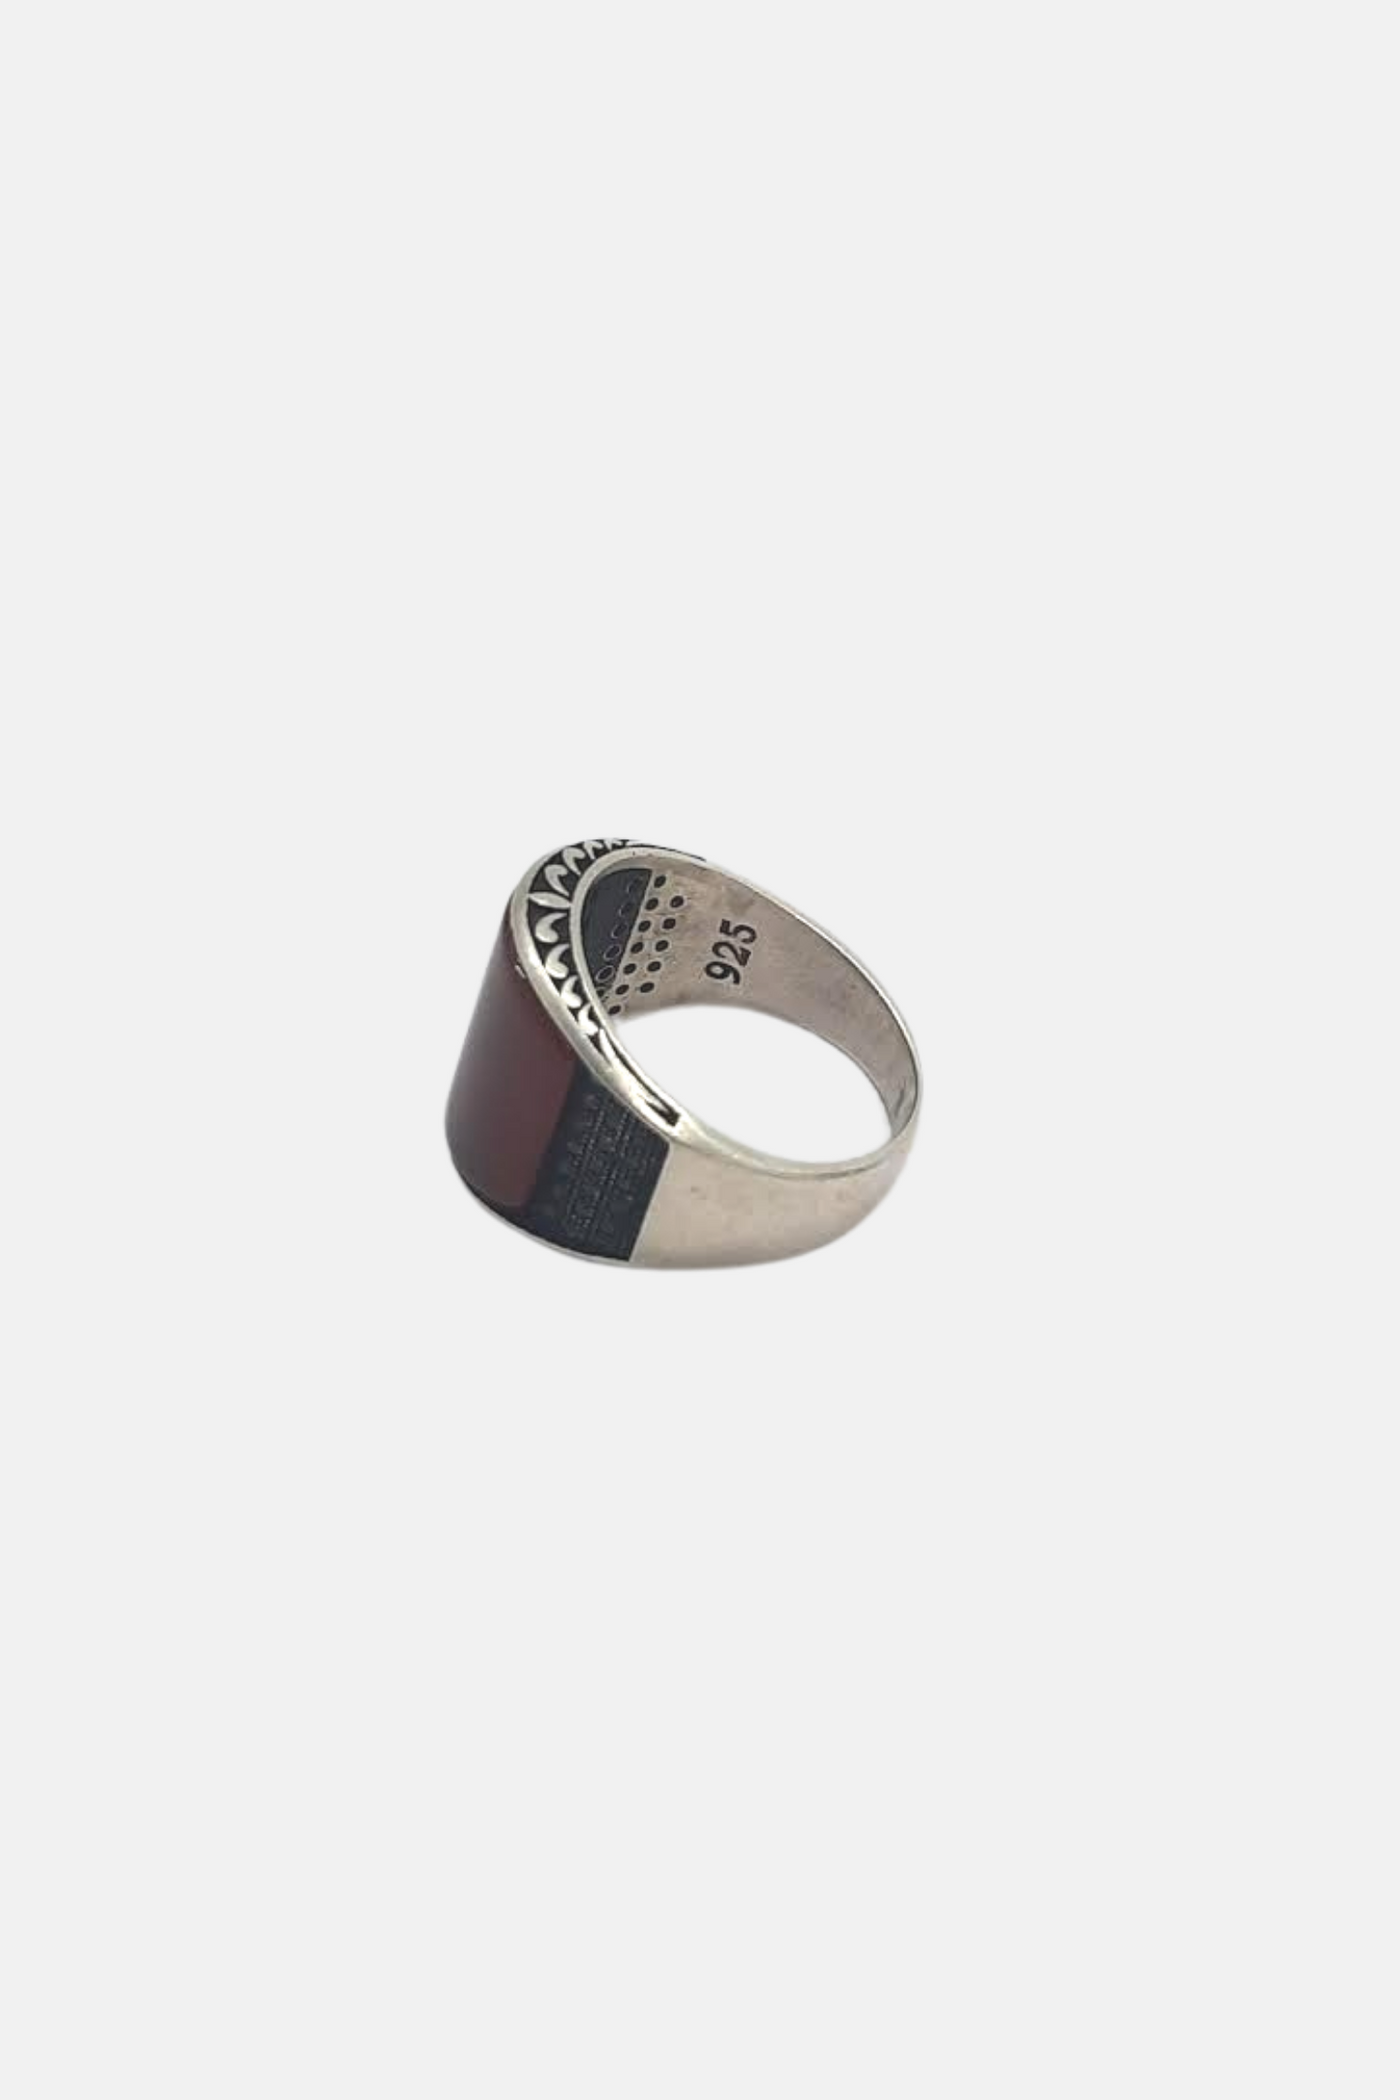 Red Stone Oval Shaped Stylish Ring